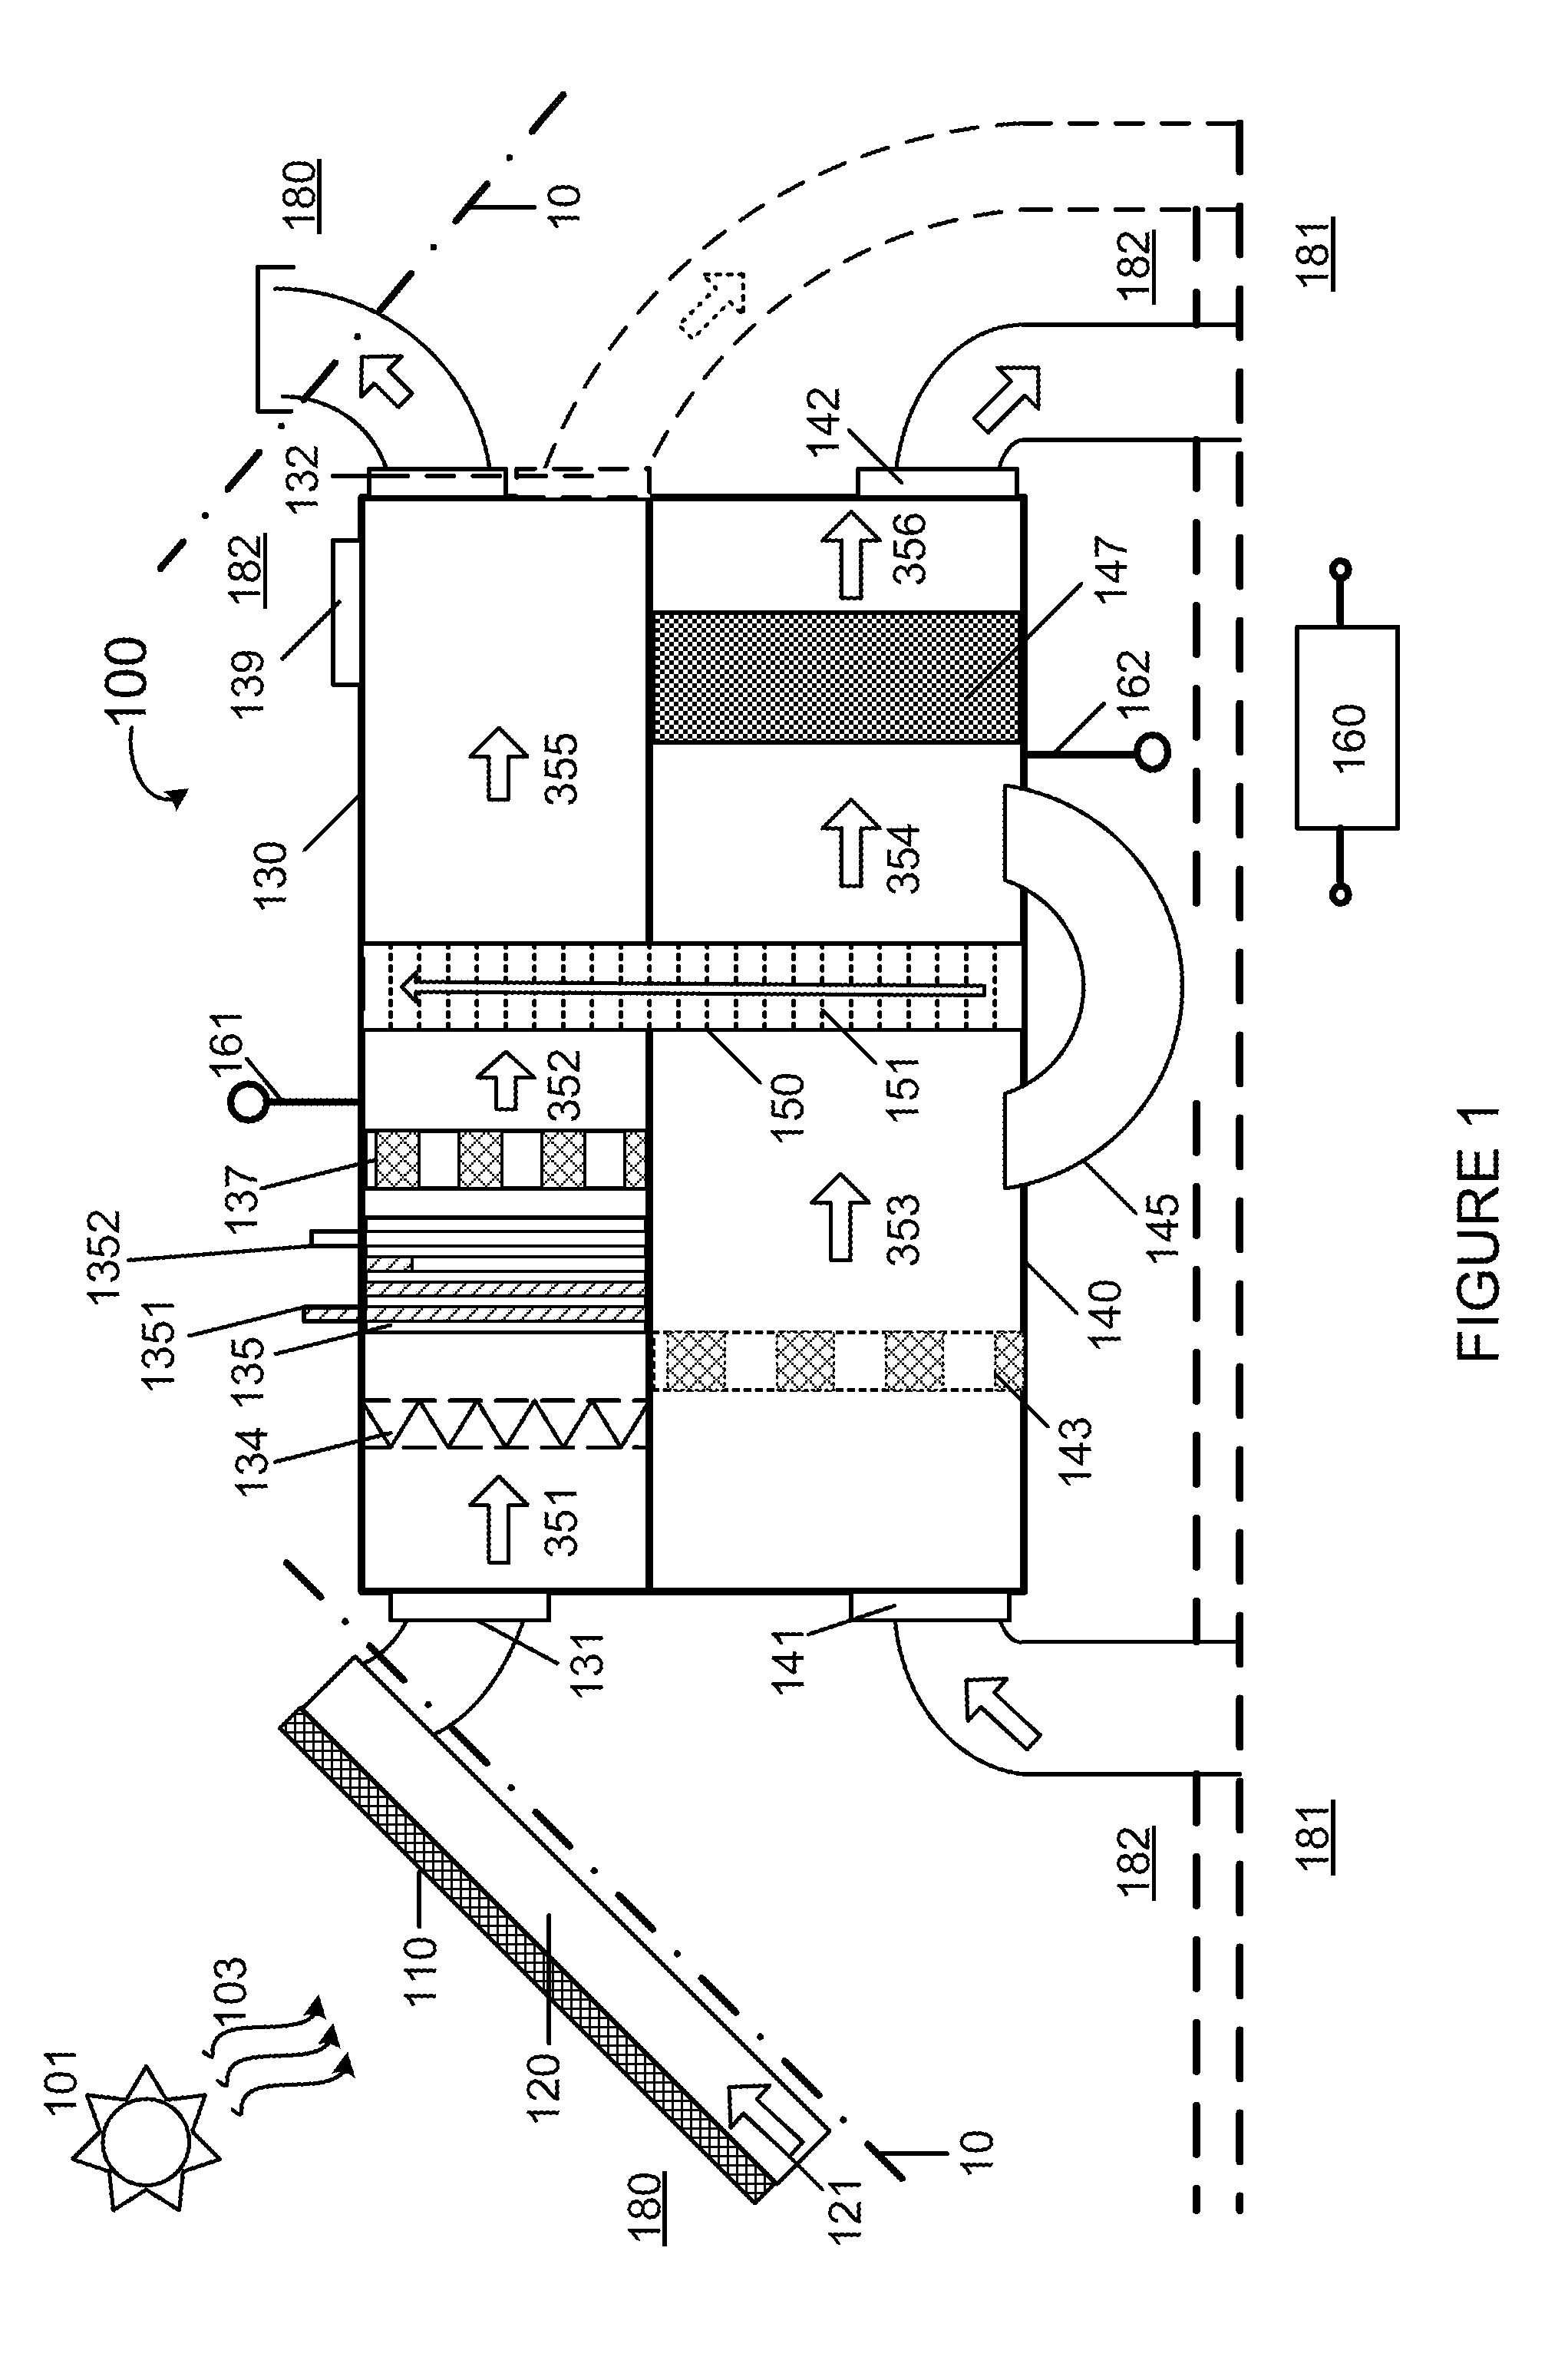 Method and system for integrated home cooling utilizing solar power